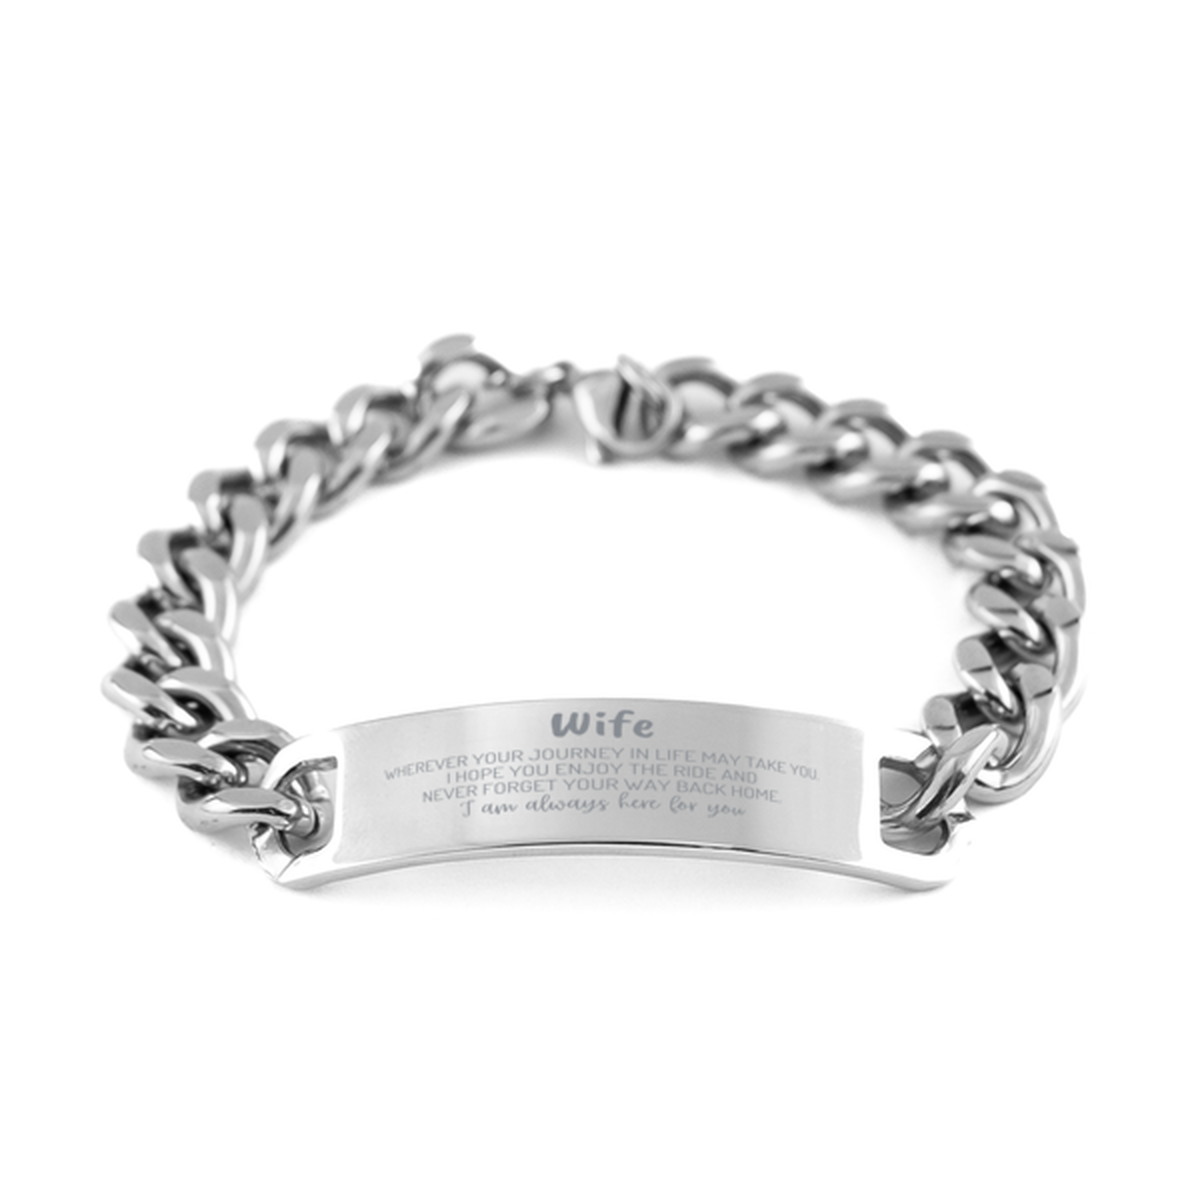 Wife wherever your journey in life may take you, I am always here for you Wife Cuban Chain Stainless Steel Bracelet, Awesome Christmas Gifts For Wife, Wife Birthday Gifts for Men Women Family Loved One